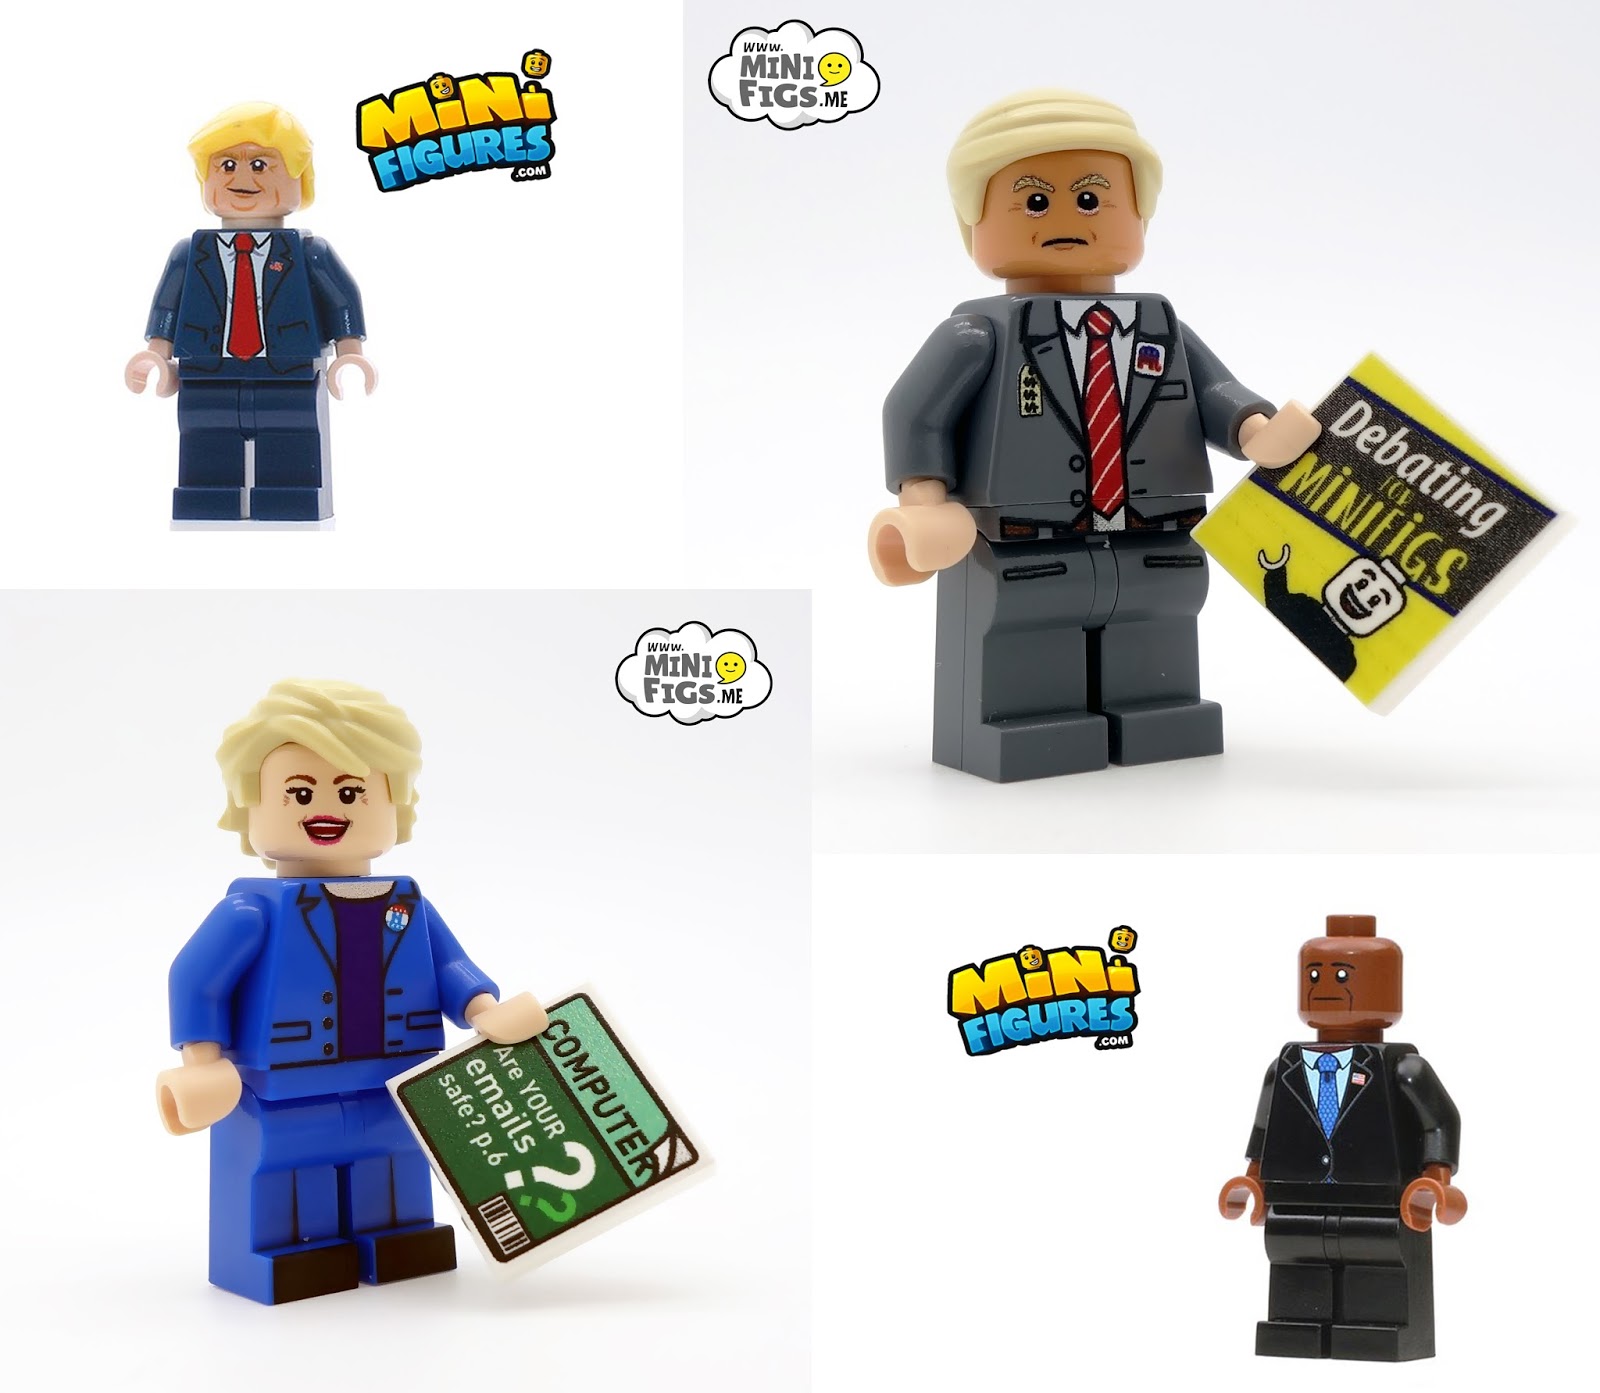 Look at some people made of LEGO ! - My Lego